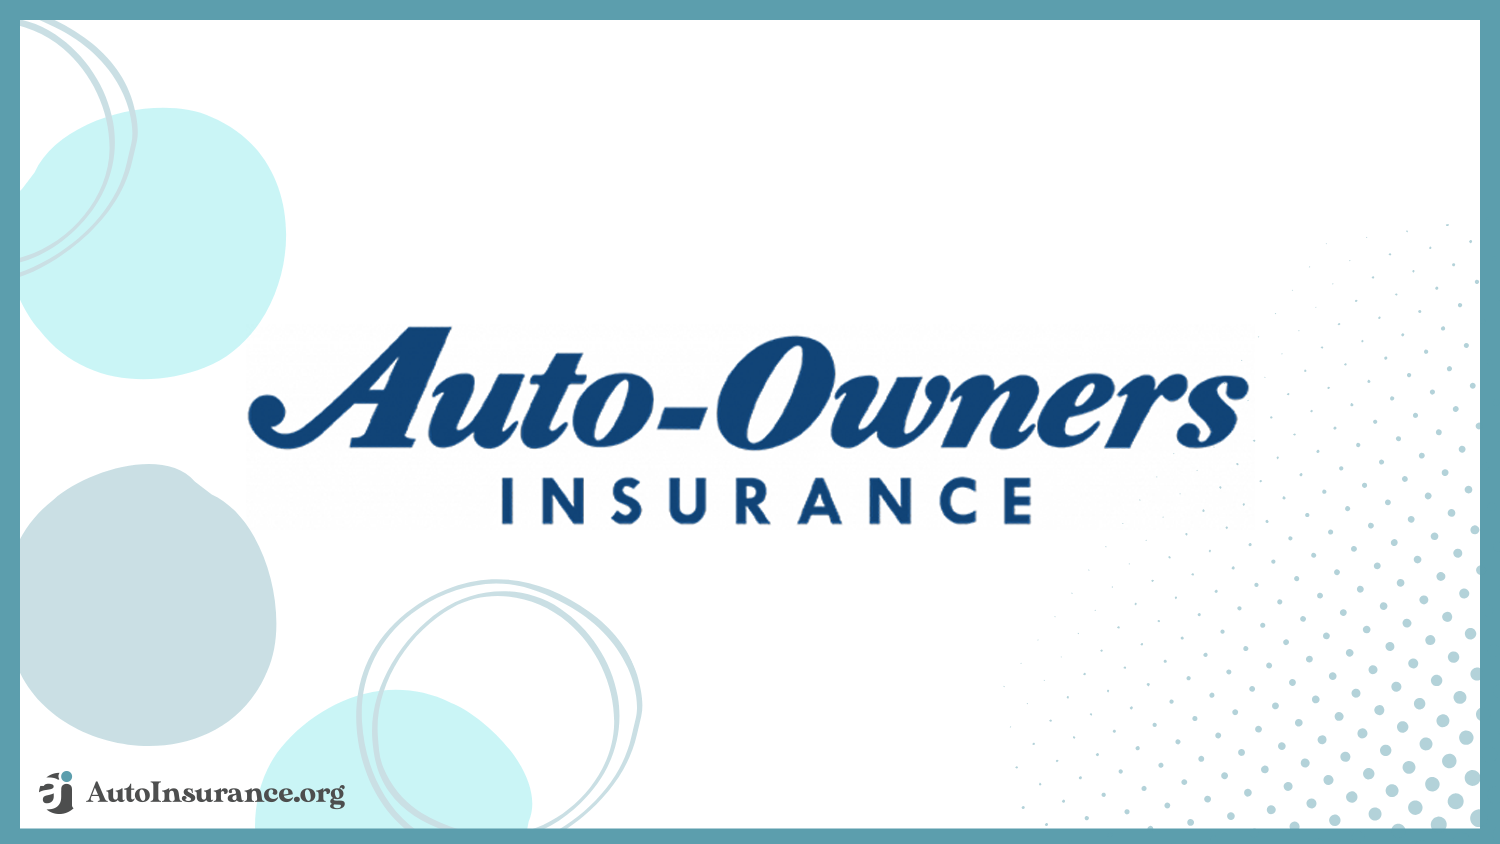 Auto-Owners: Best Comprehensive Auto Insurance Companies